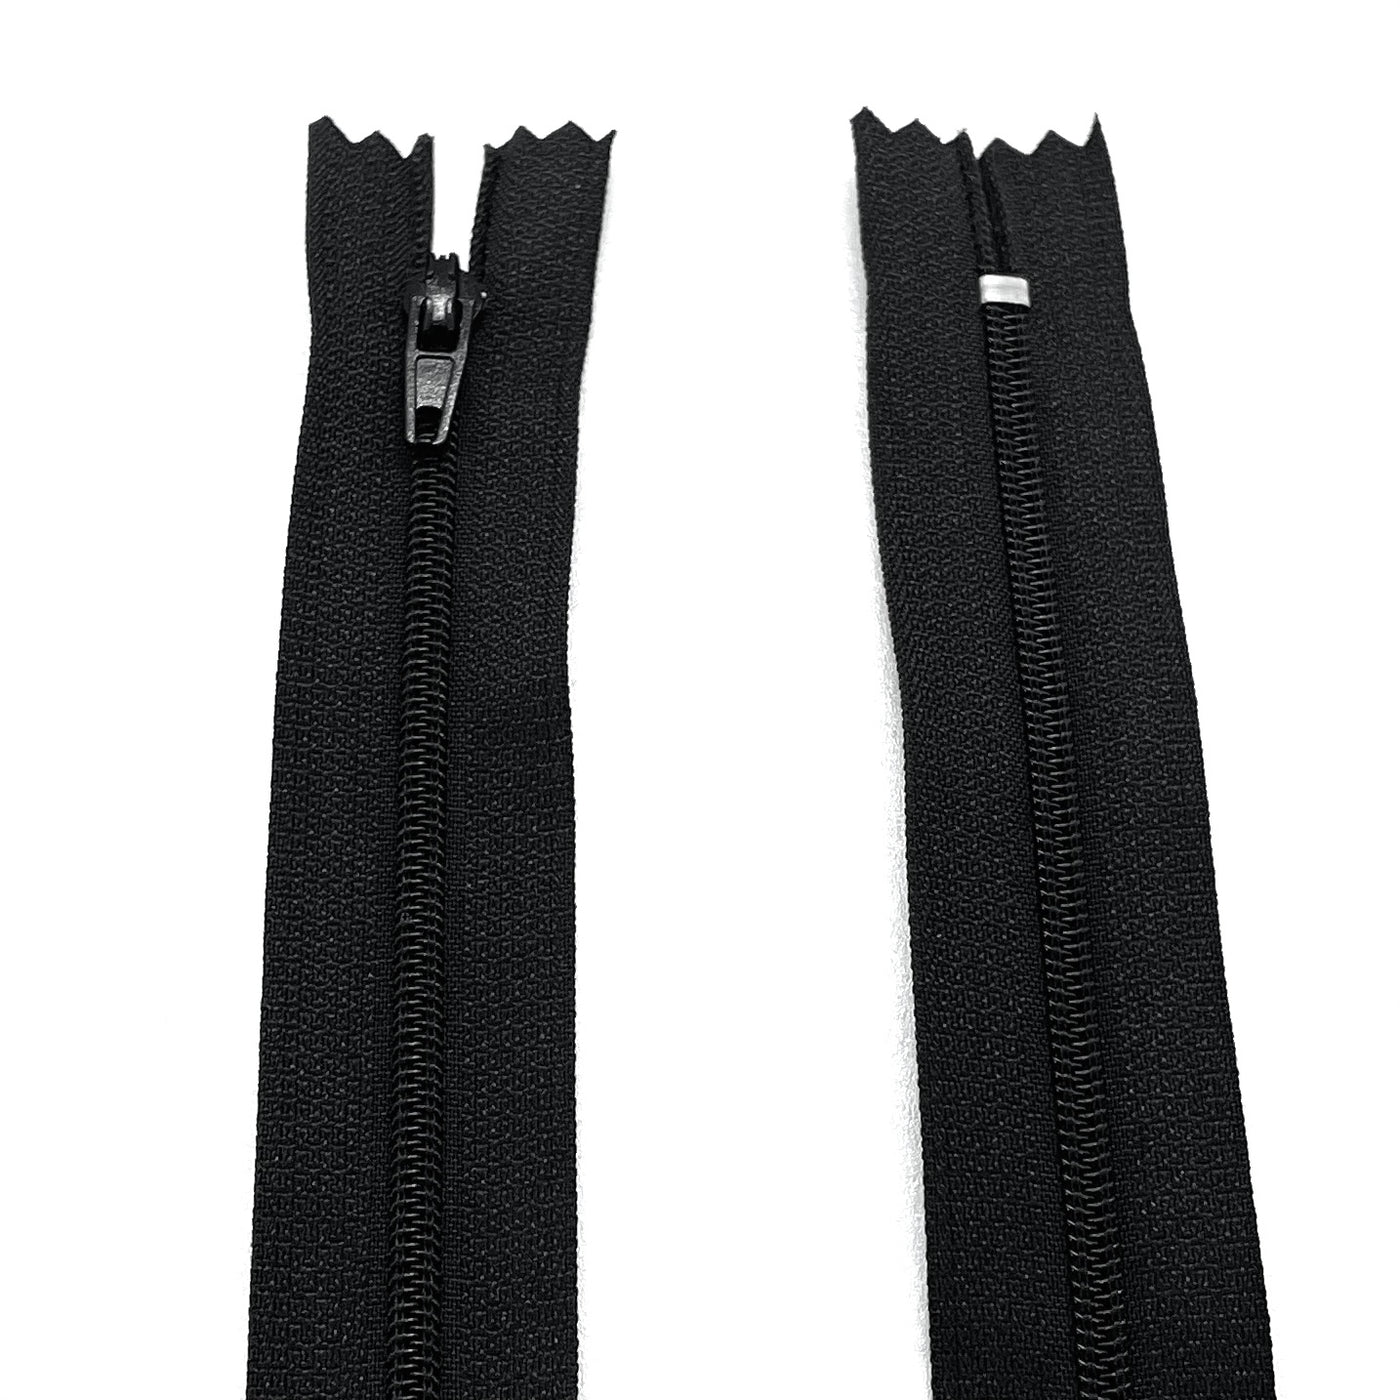 Photo of black nylon zips available in 25 colors and 5 sizes. Excellent quality zippers for craft and dressmaking purposes. Perfect for dresses, skirts, trousers, bags, purses, cushions, and numerous other projects. So many possibilities, so little time!